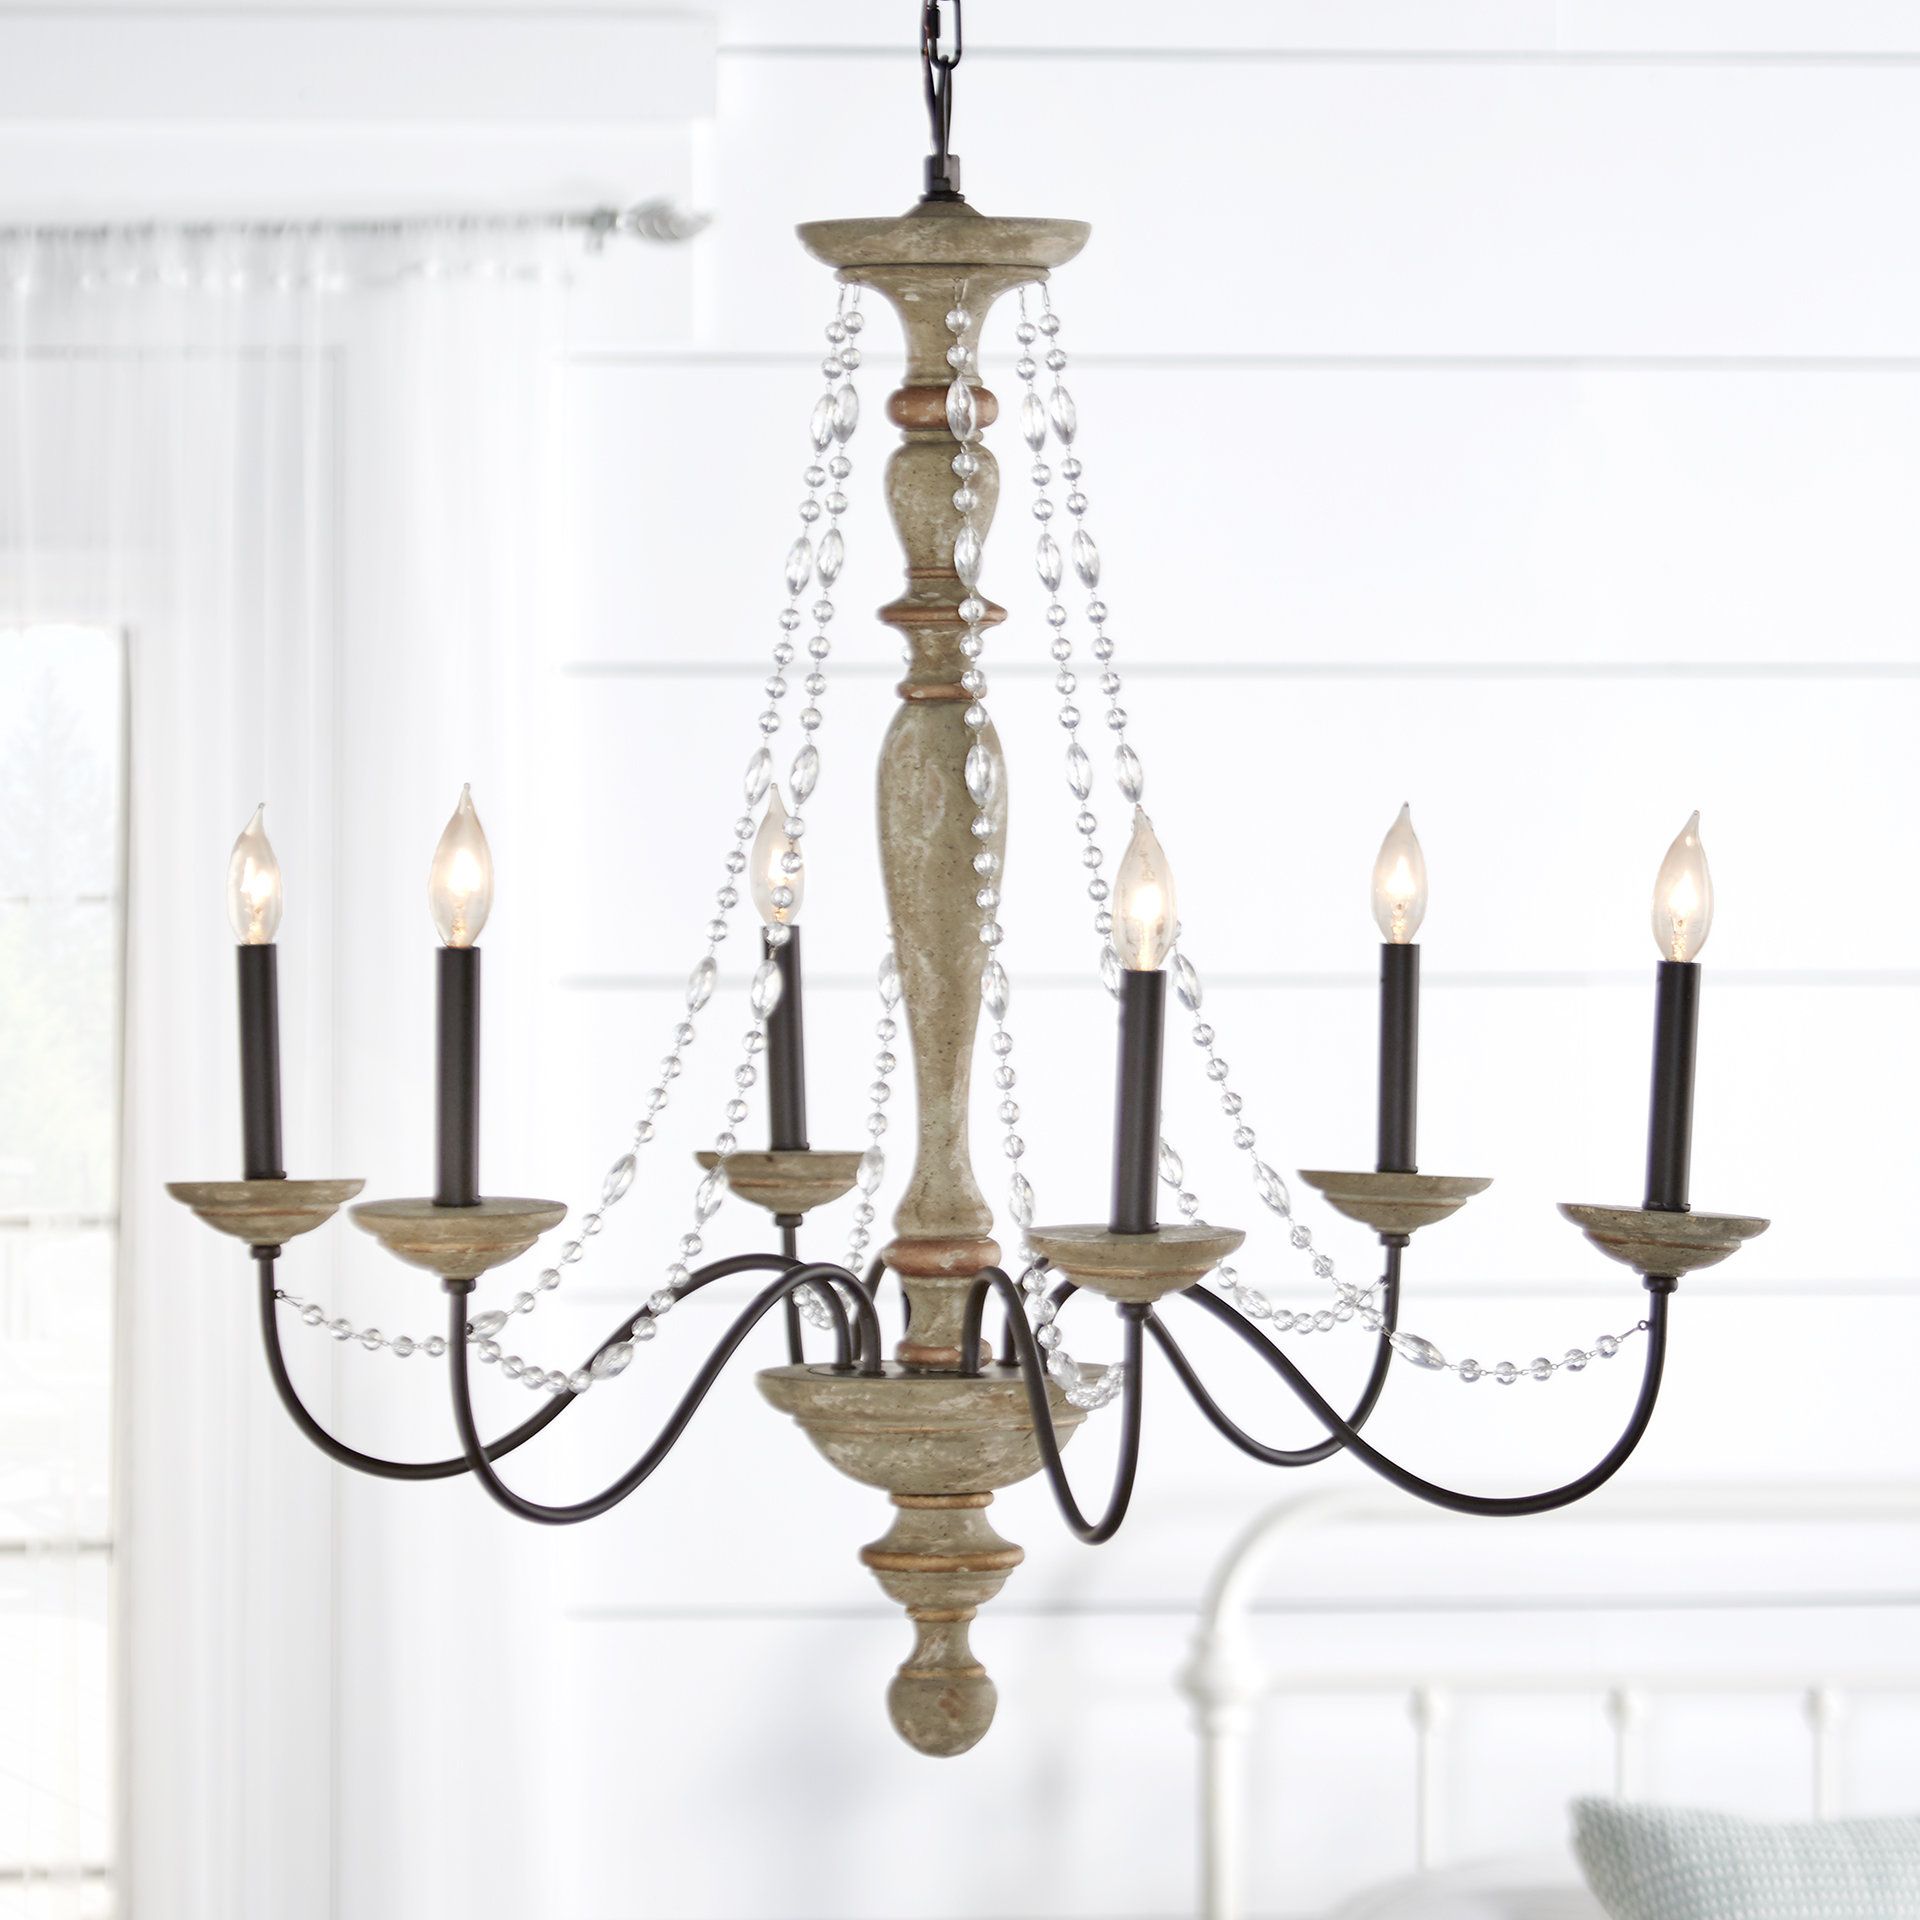 Three Posts Brennon 6 Light Candle Style Chandelier With Well Known Perseus 6 Light Candle Style Chandeliers (View 15 of 25)